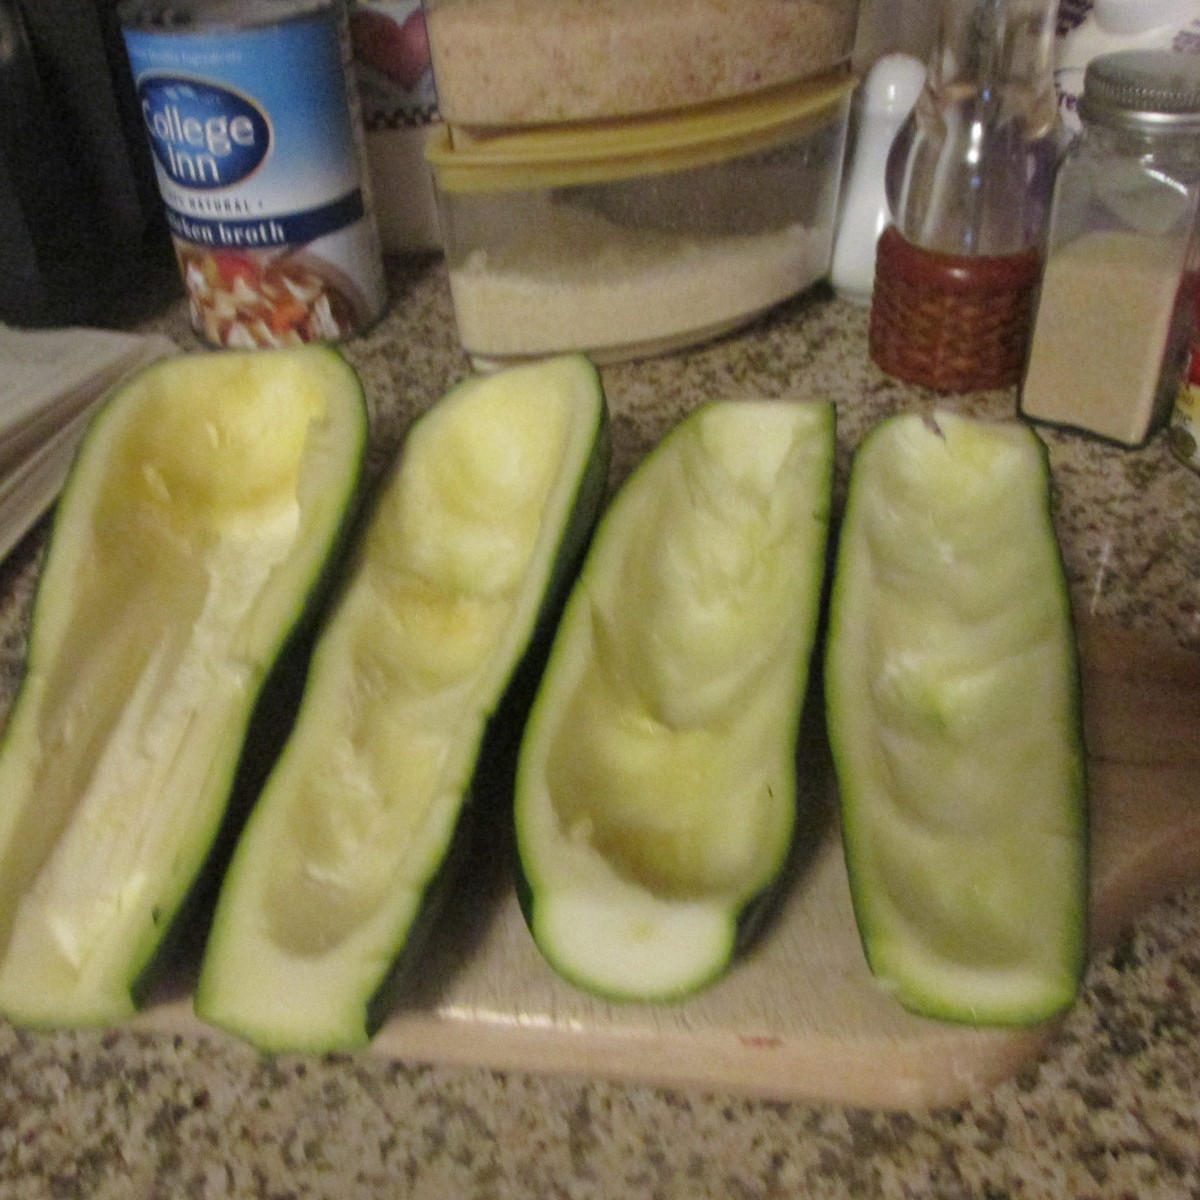 Scoop out the zucchini boats